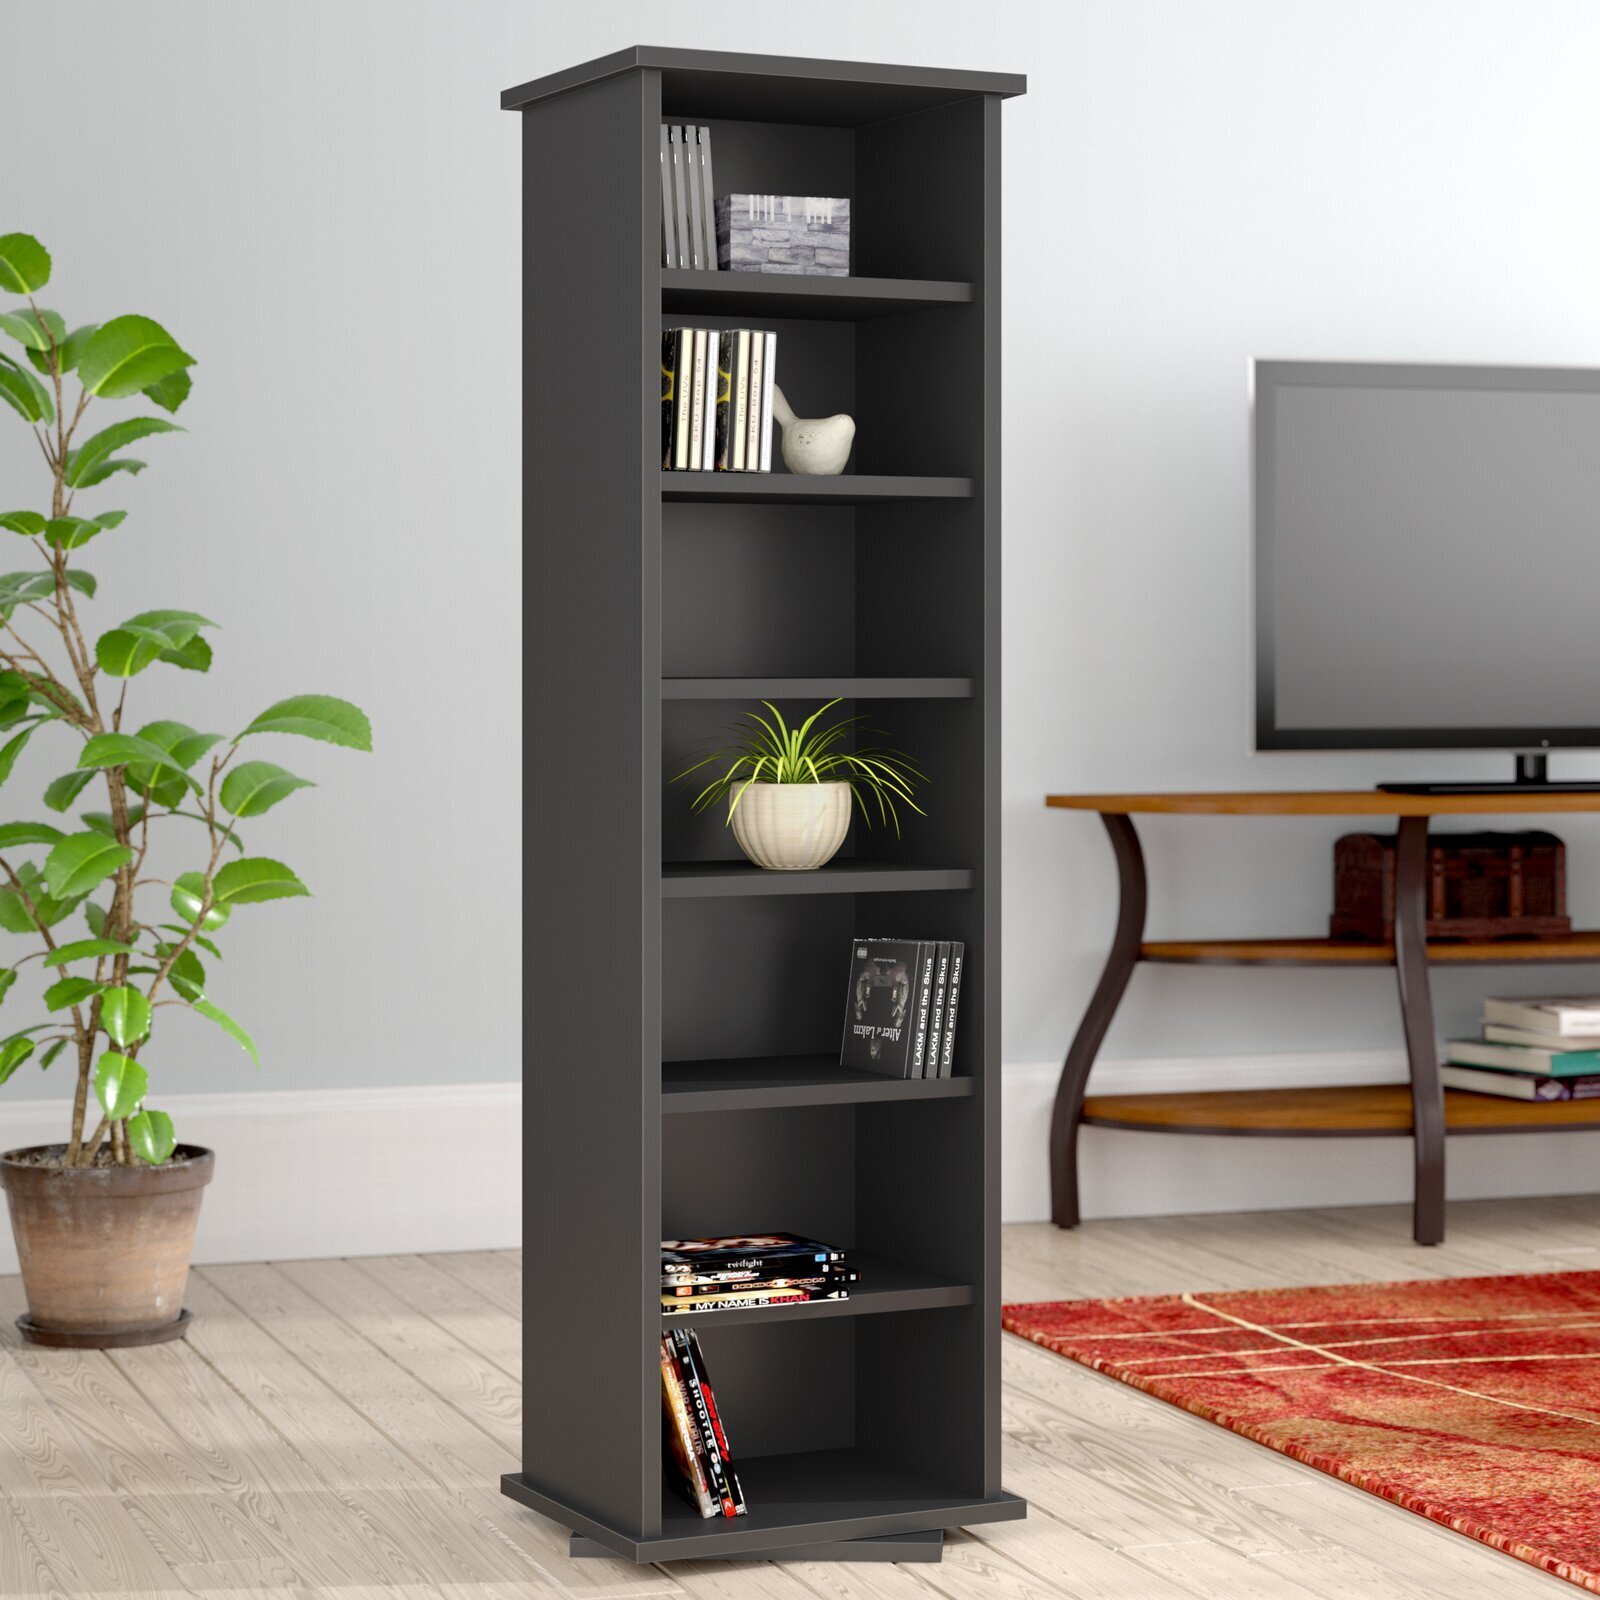 Two sided CD shelving unit